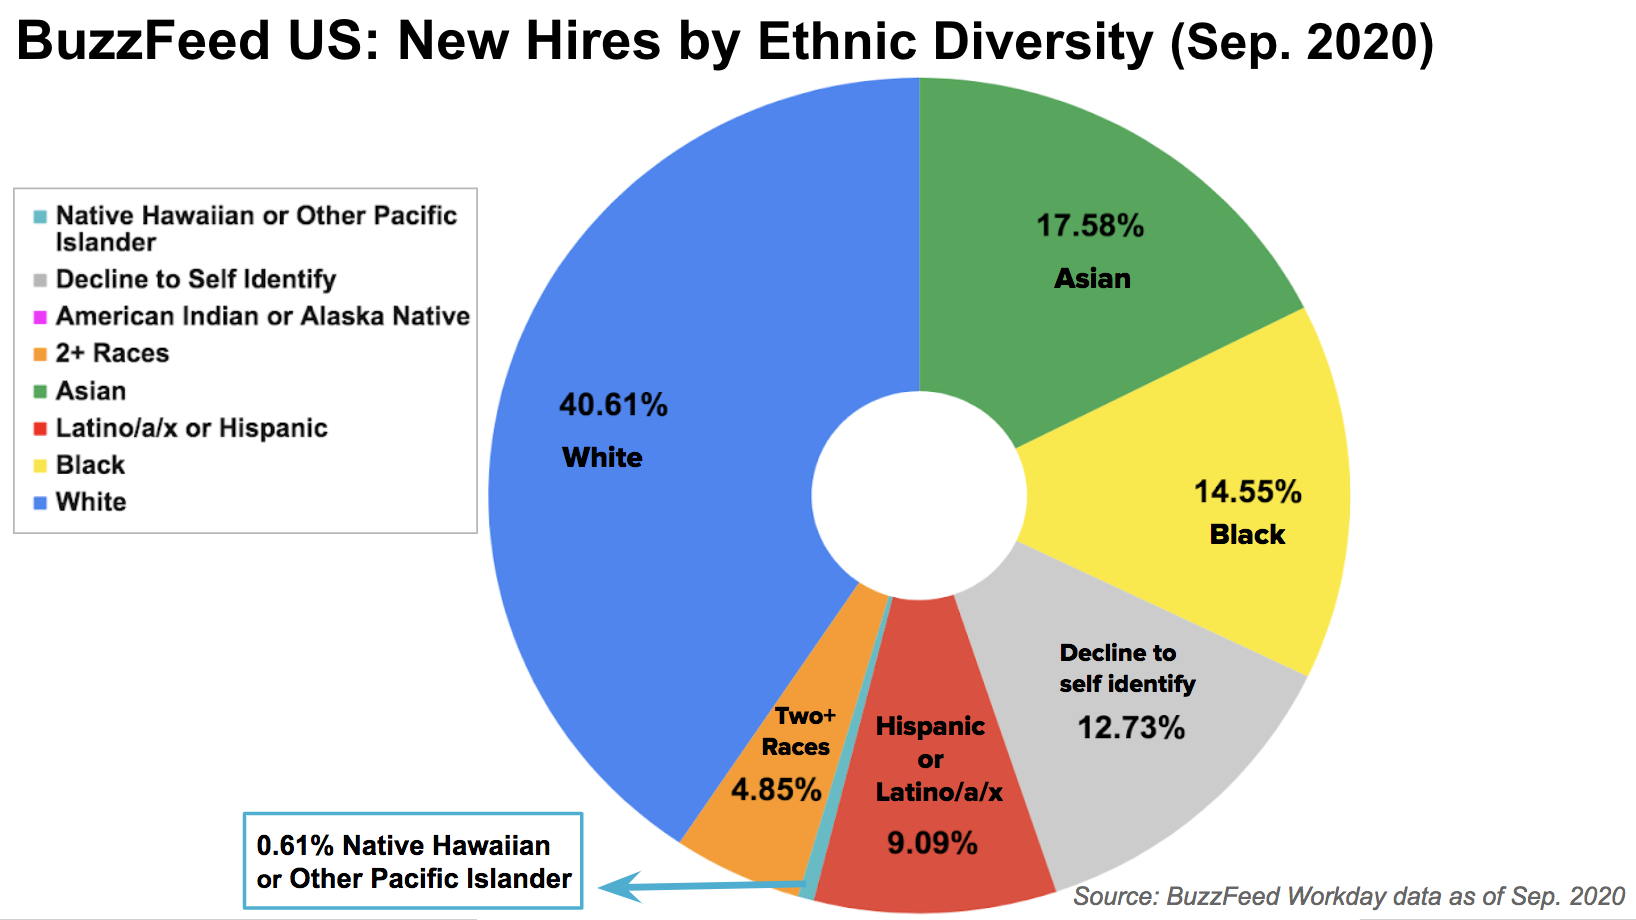 This is a pie chart depicting the ethnic diversity of new hires, meaning anyone hired in the past 12 months, based on data from September 2020.